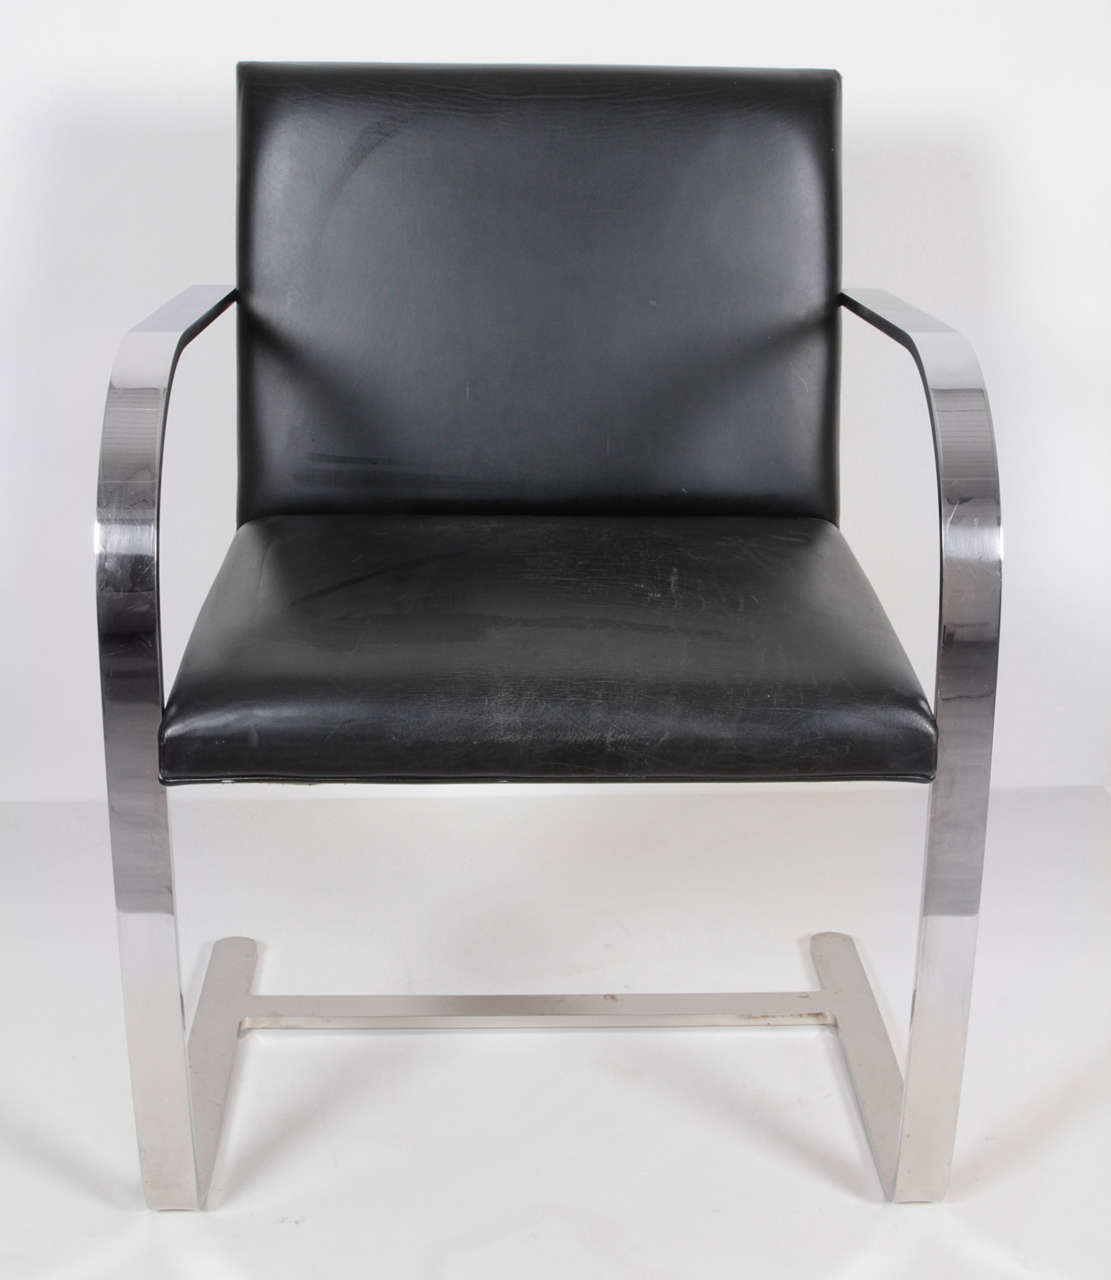 Set of three Mies van der Rohe Brno chairs, 1997.
Modernist cantilever chairs in polished steel with original black leather seat and back.

One chair has original dated label under seat.